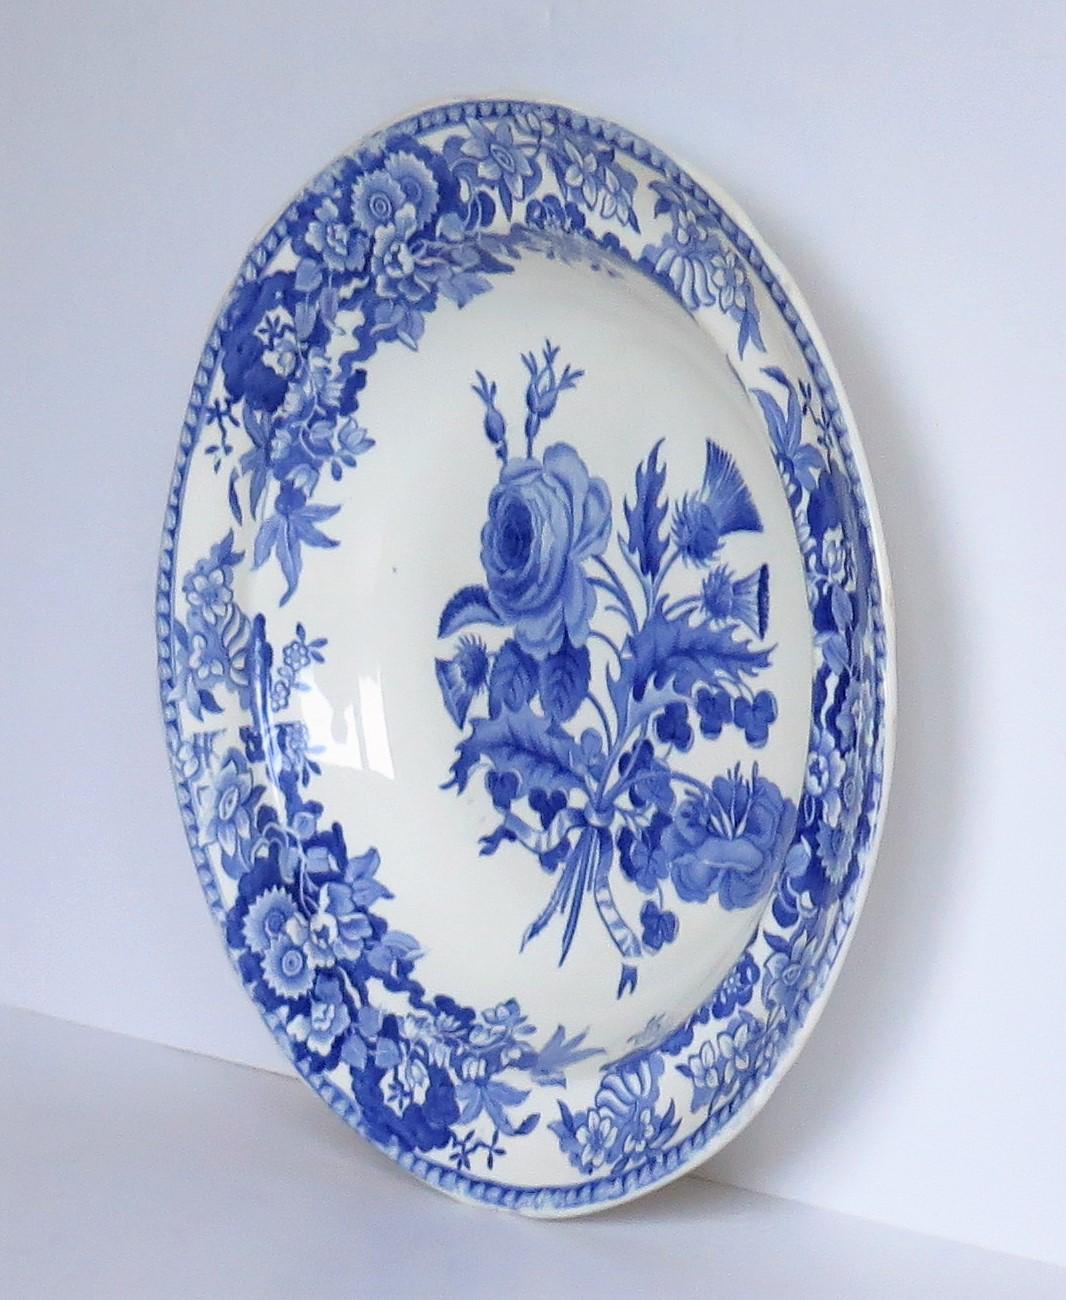 Glazed Georgian Plate or Bowl by Spode in Blue and White Union Wreath Ptn No.3, Ca 1820